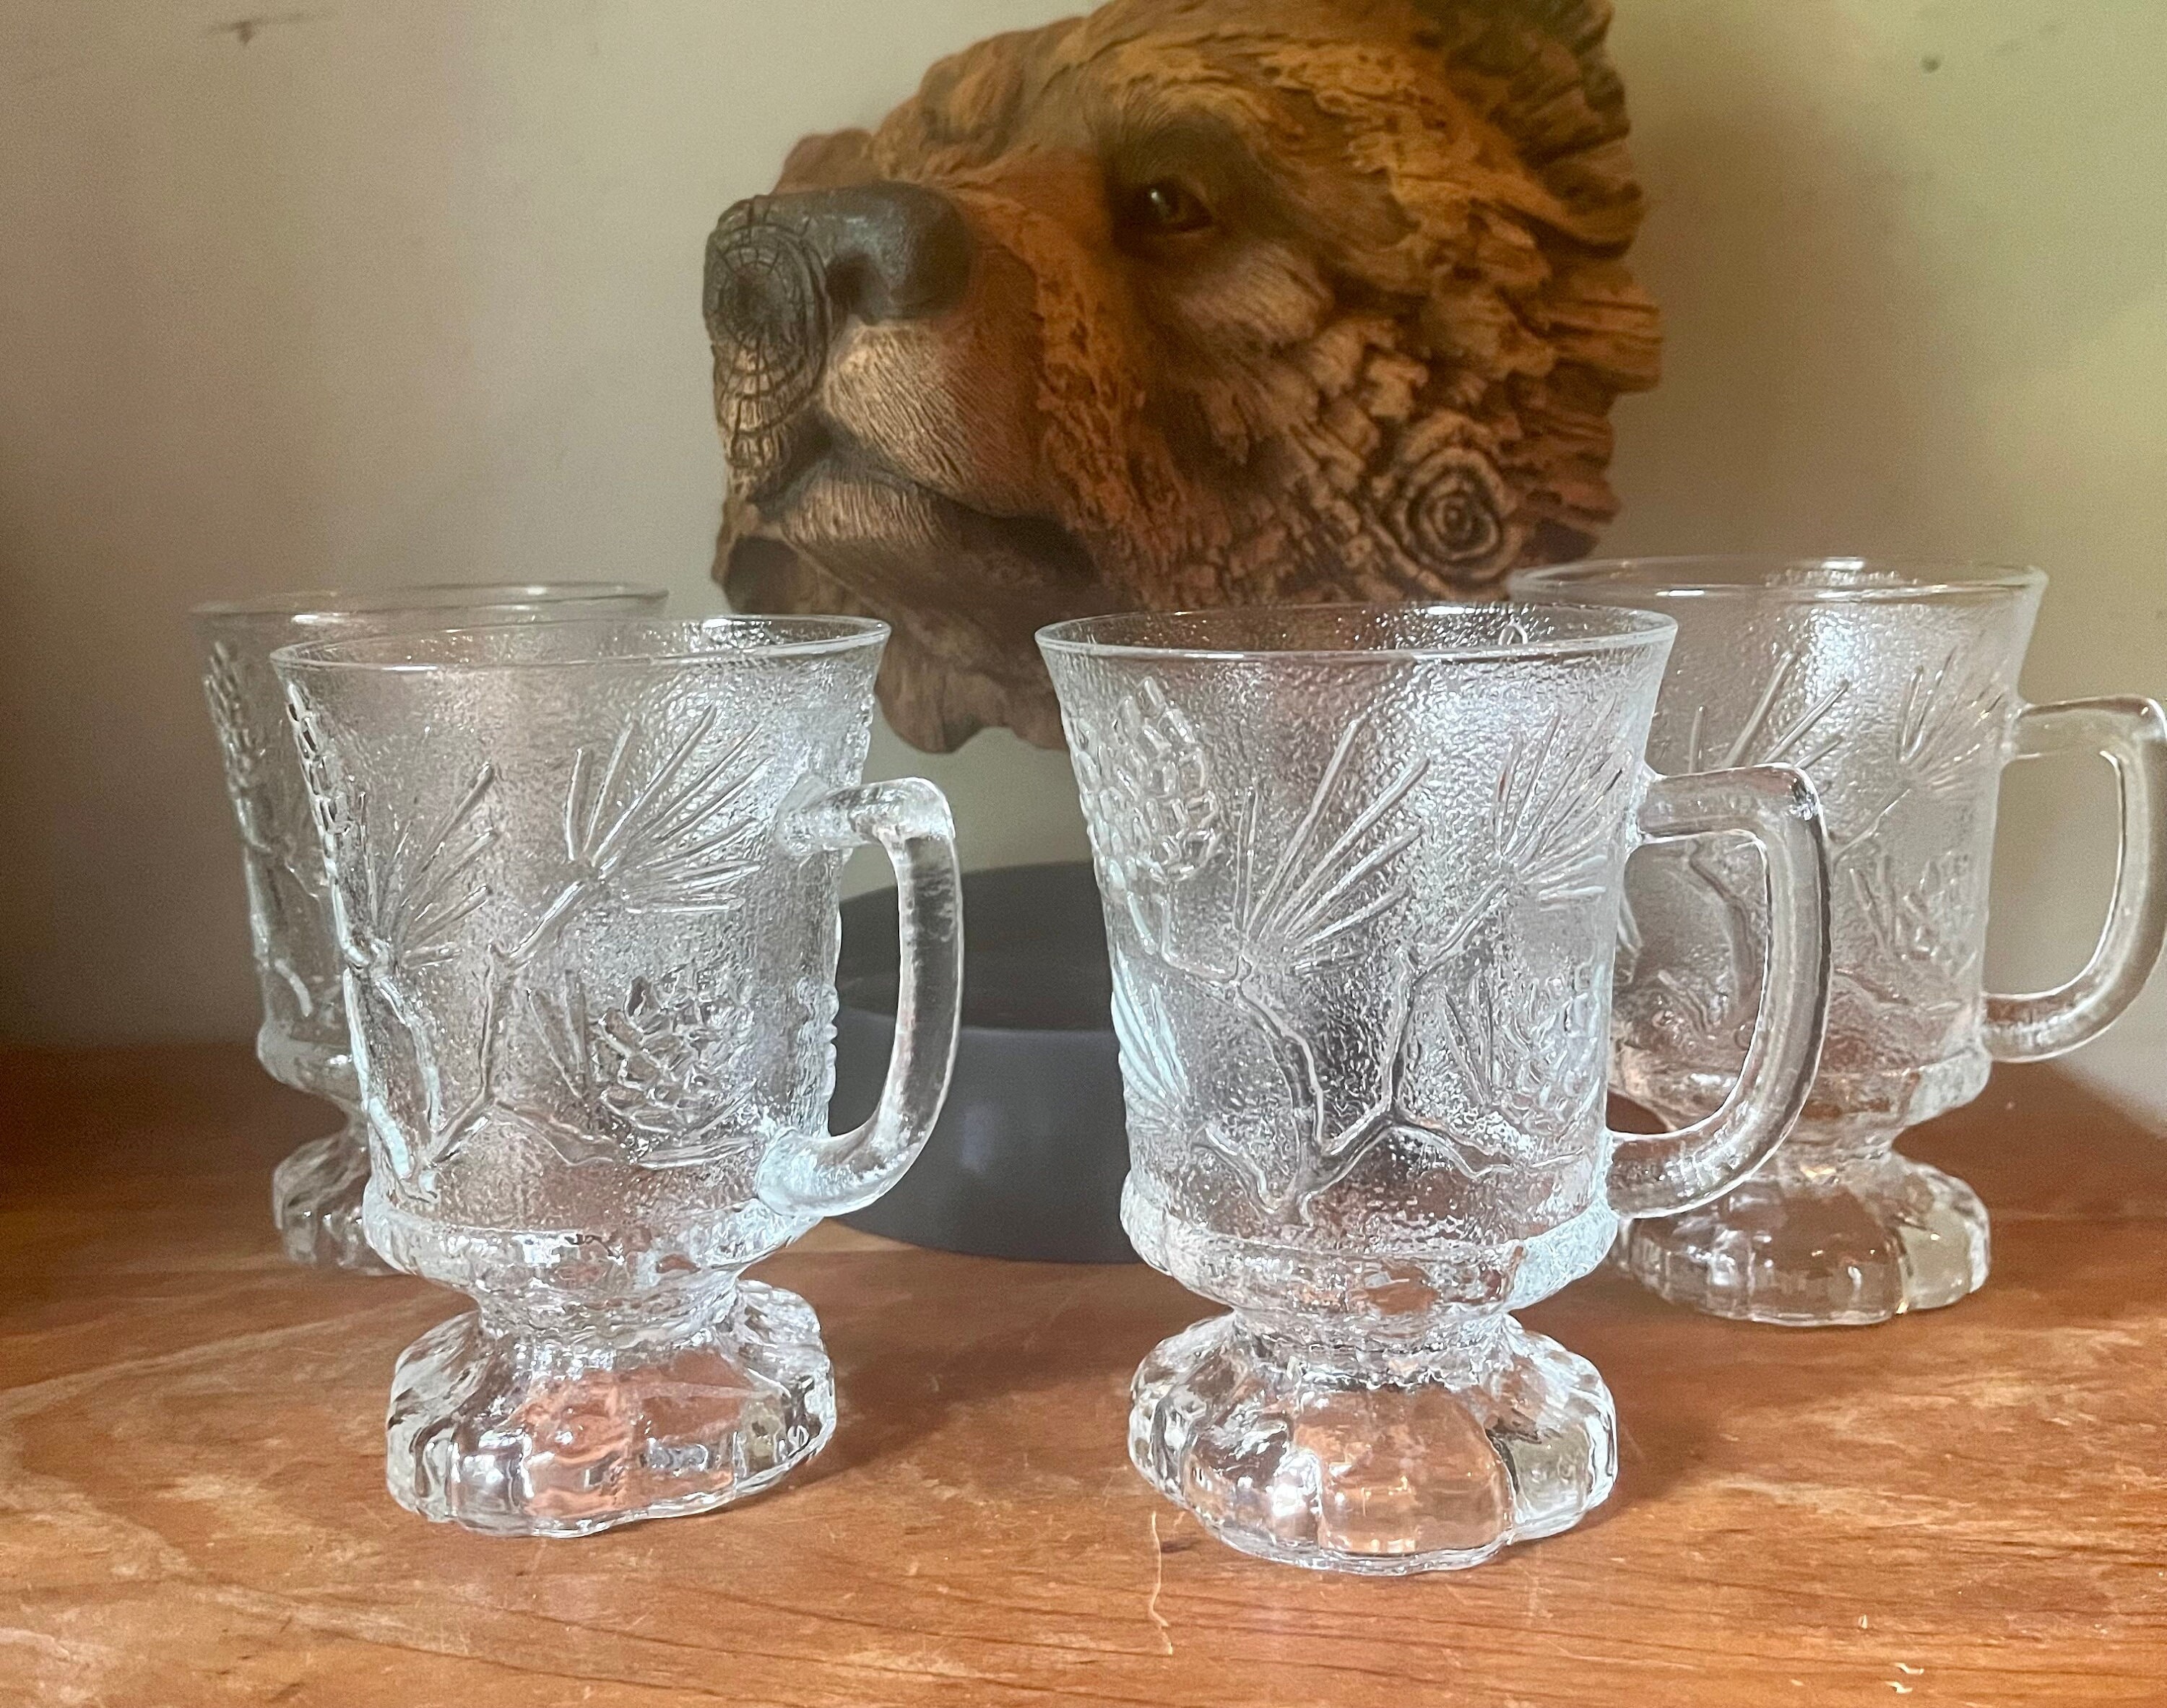 Set of 4 Tiara Exclusives Vintage Footed Coffee Mugs, Ponderosa Pine,  Indiana Glass Company, Pinecone Textured Glass 